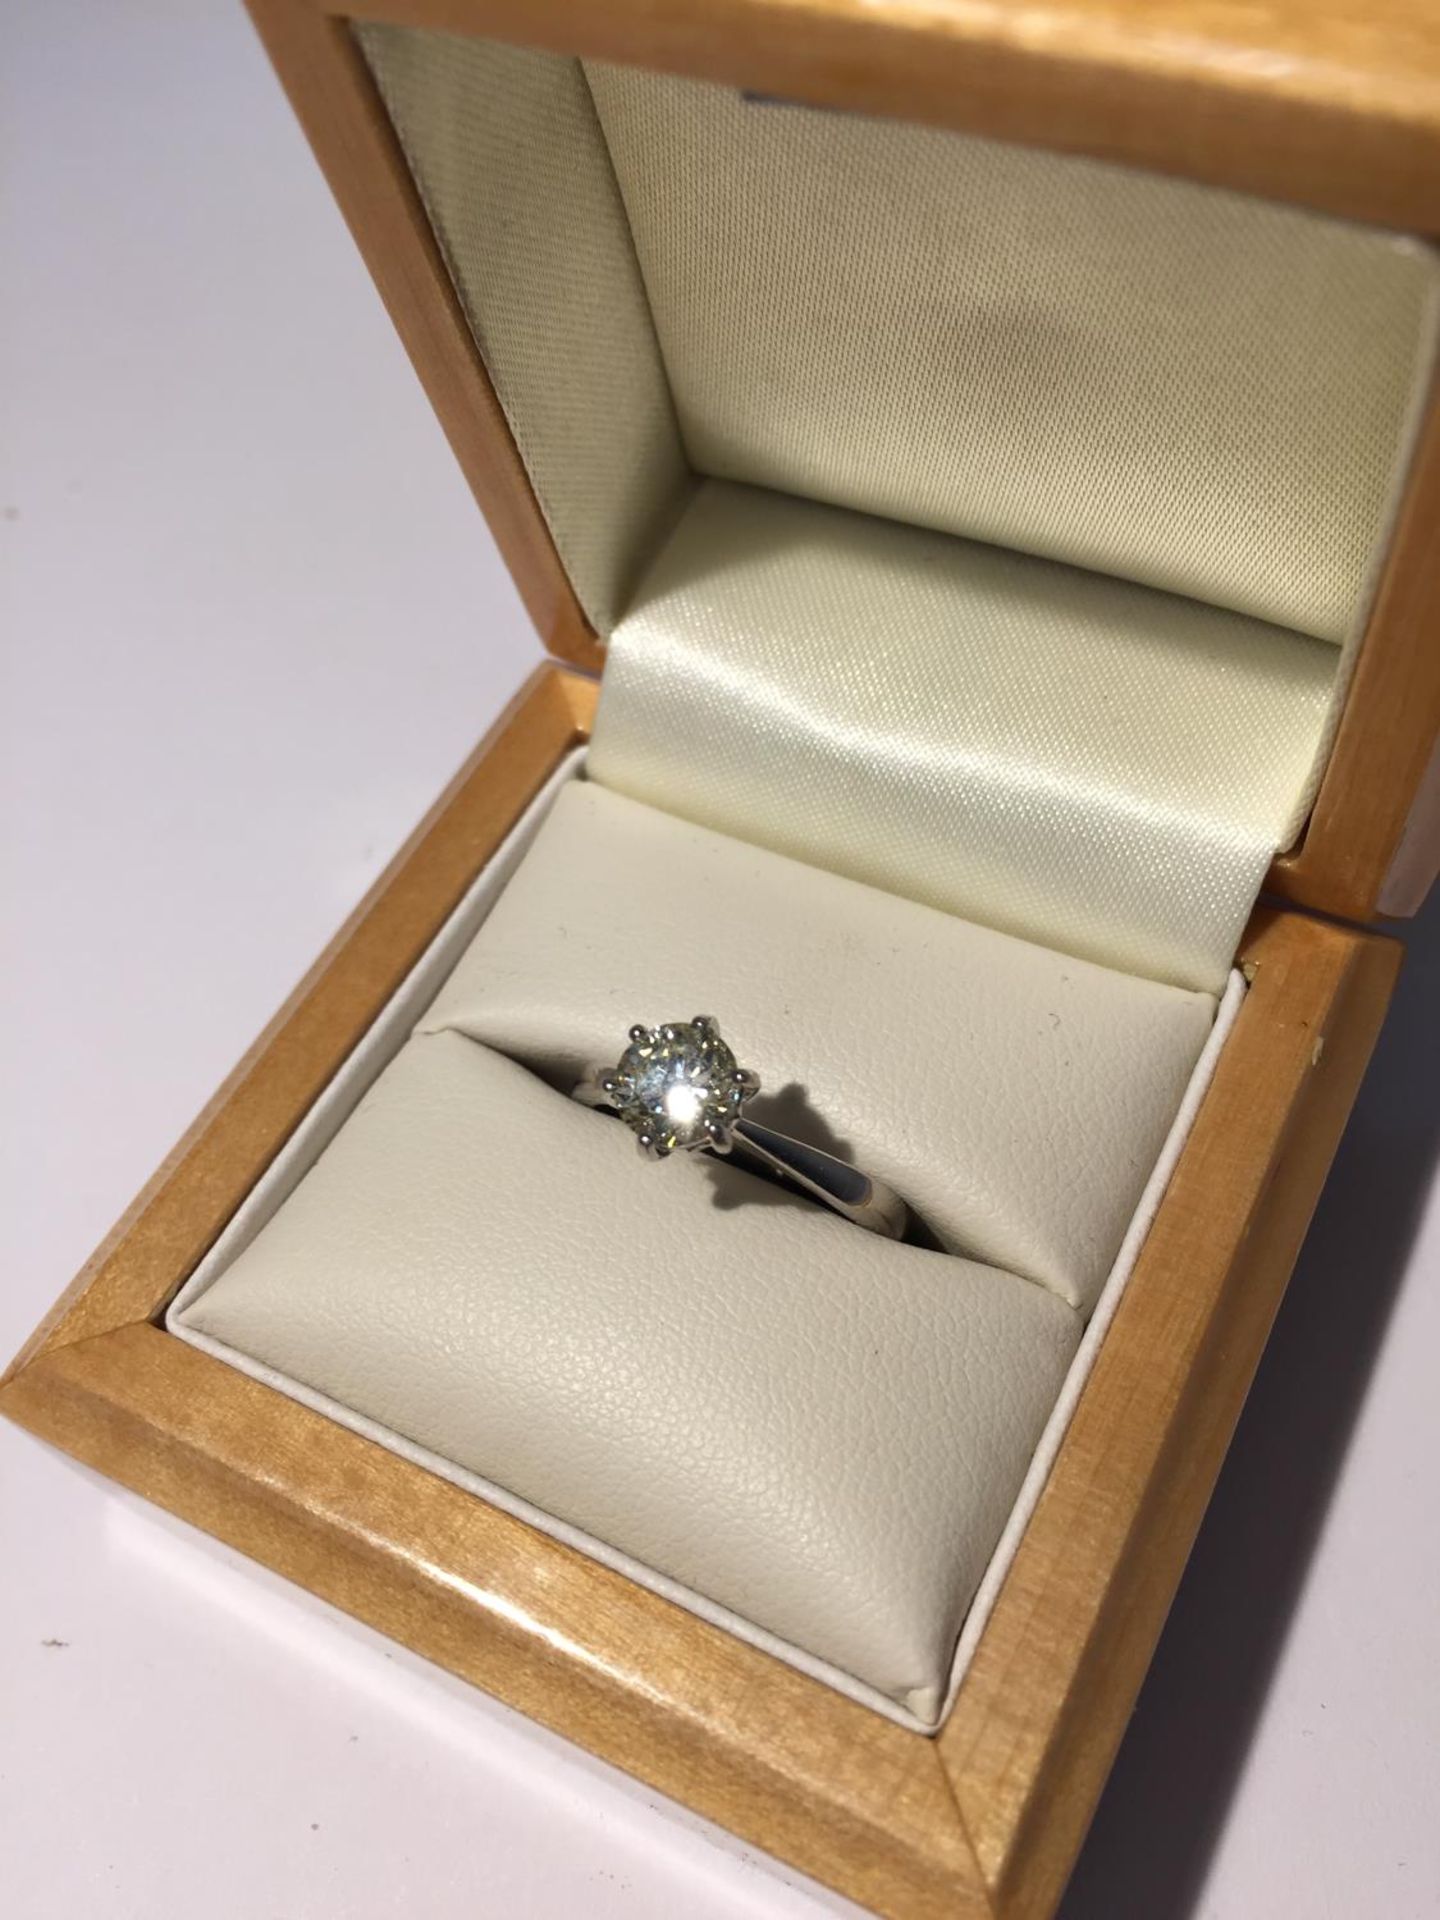 A PLATINIUM RING WITH A DIAMOND SOLITAIRE I CARAT SI1 K COLOUR SIZE M/N IN A PRESENTATION BOX - Image 7 of 7